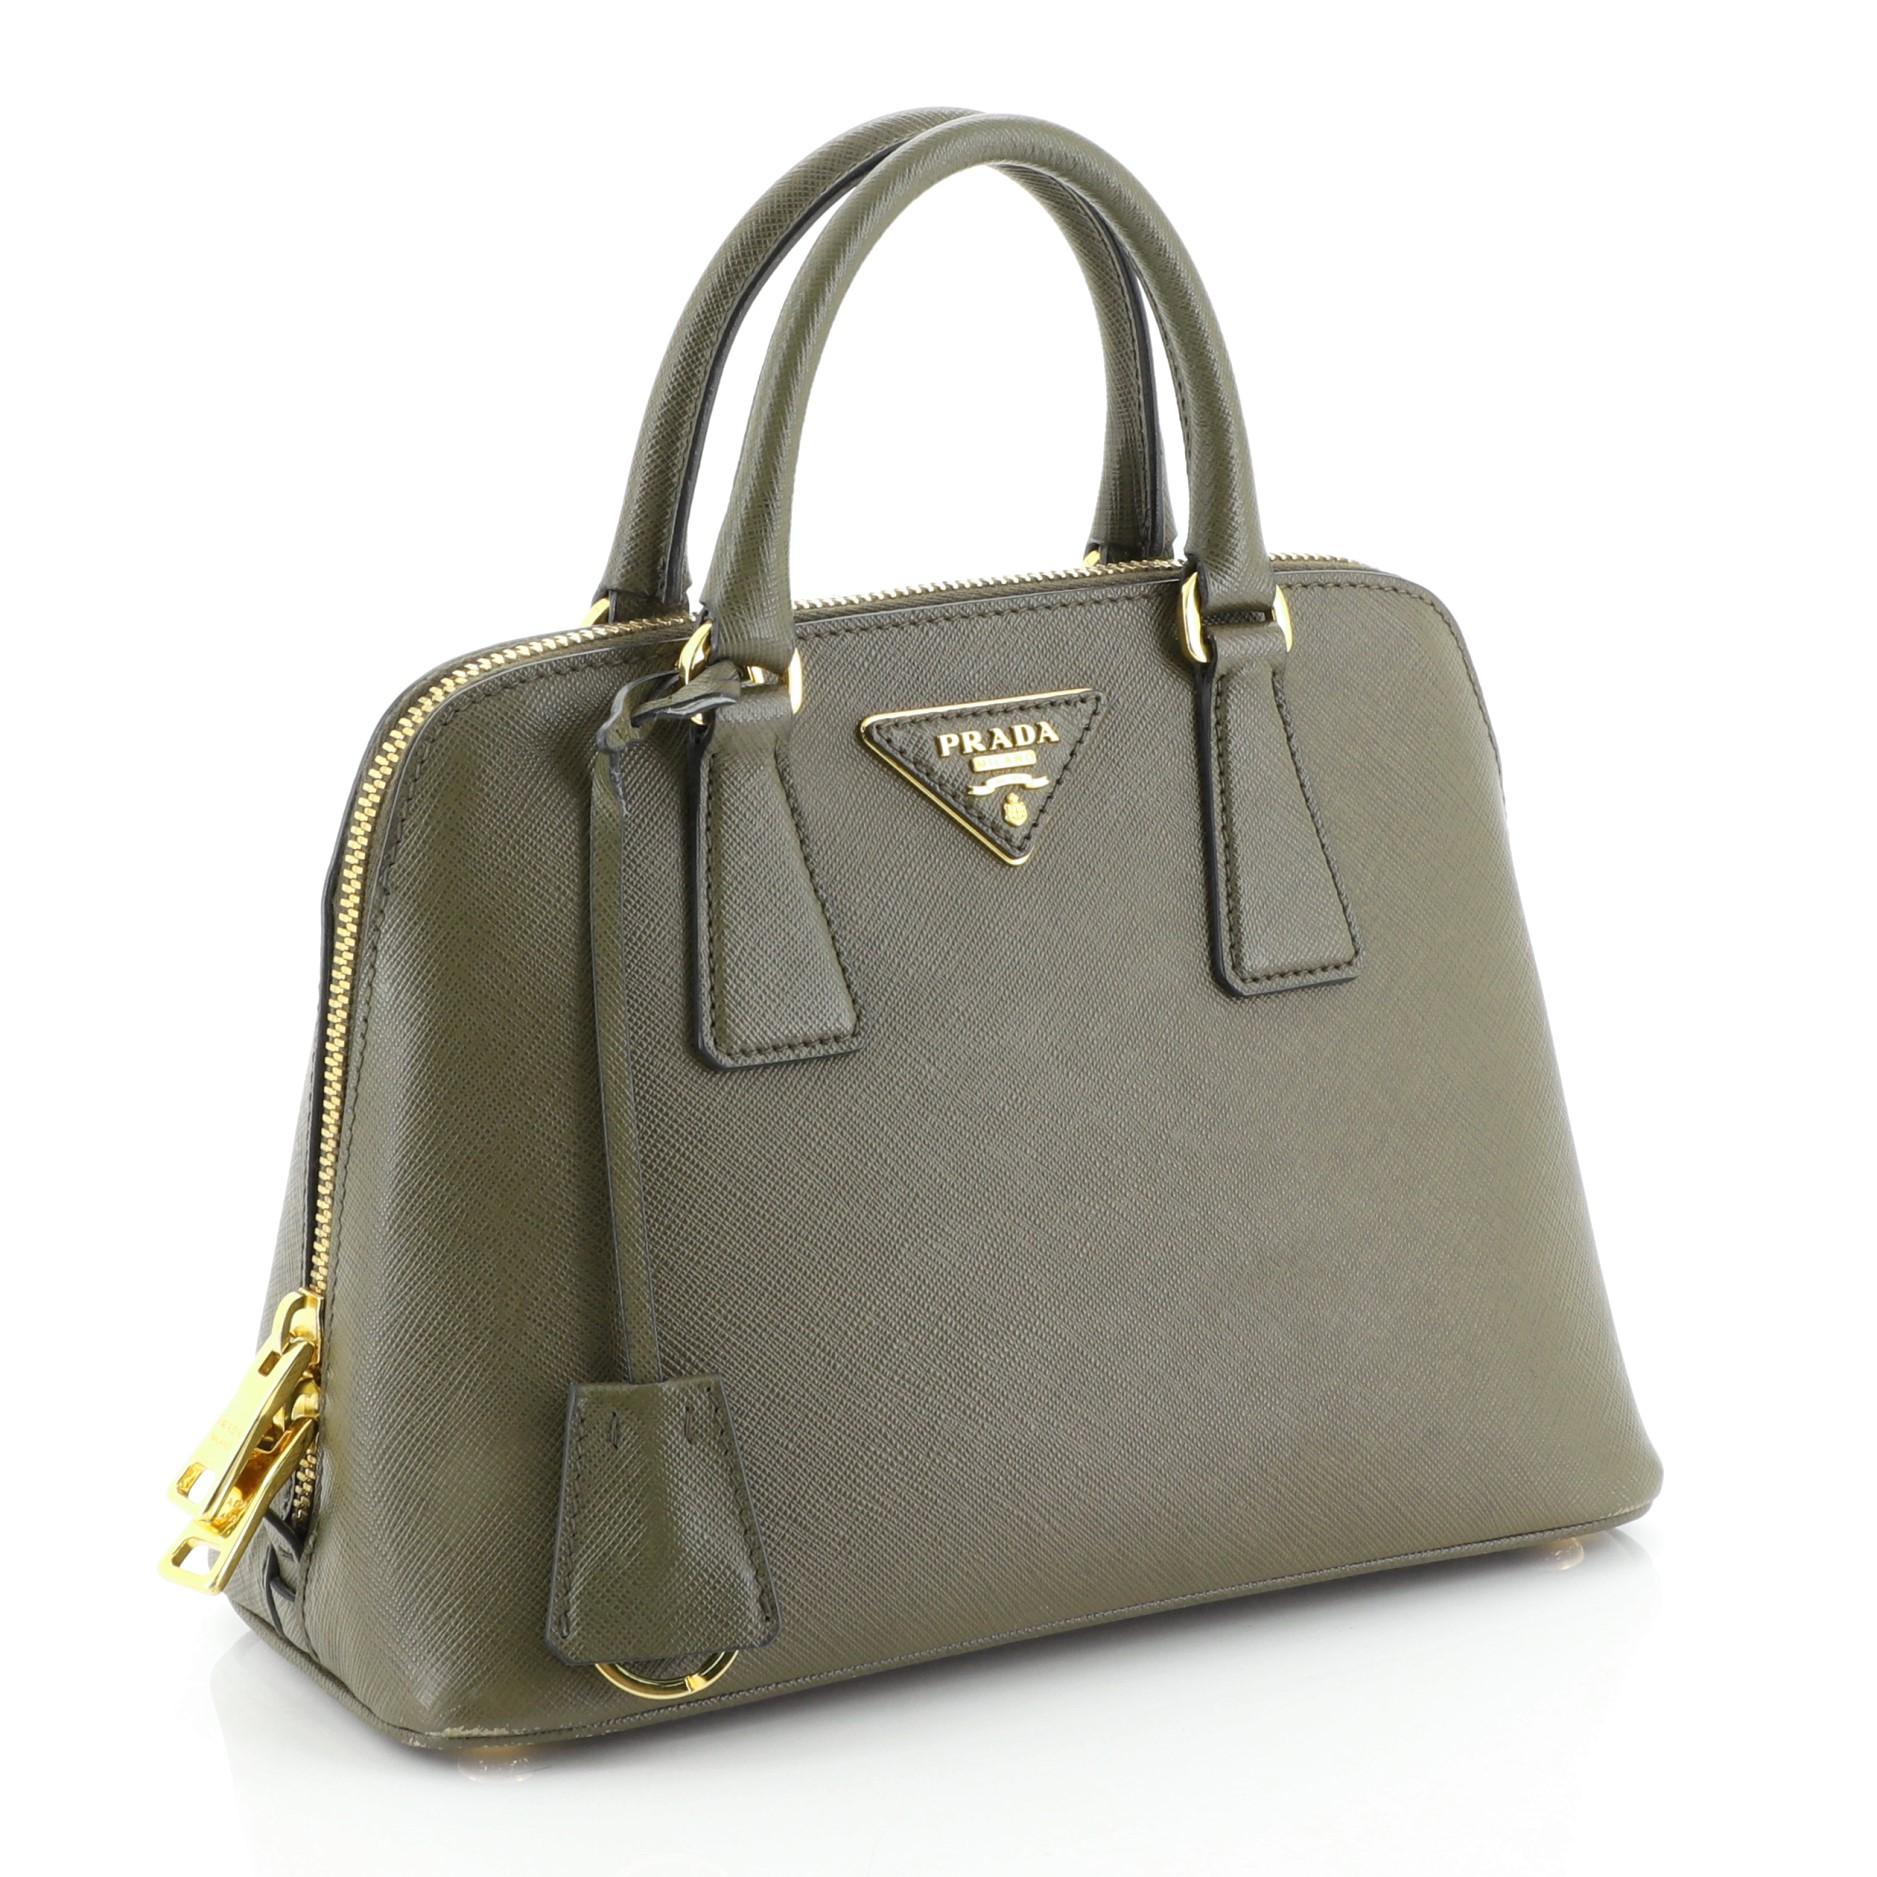 This Prada Promenade Bag Saffiano Leather Small, crafted from green saffiano leather, features dual rolled handles, triangle Prada logo, and gold-tone hardware. Its two-way zip closure opens to a black fabric interior with a center zip compartment